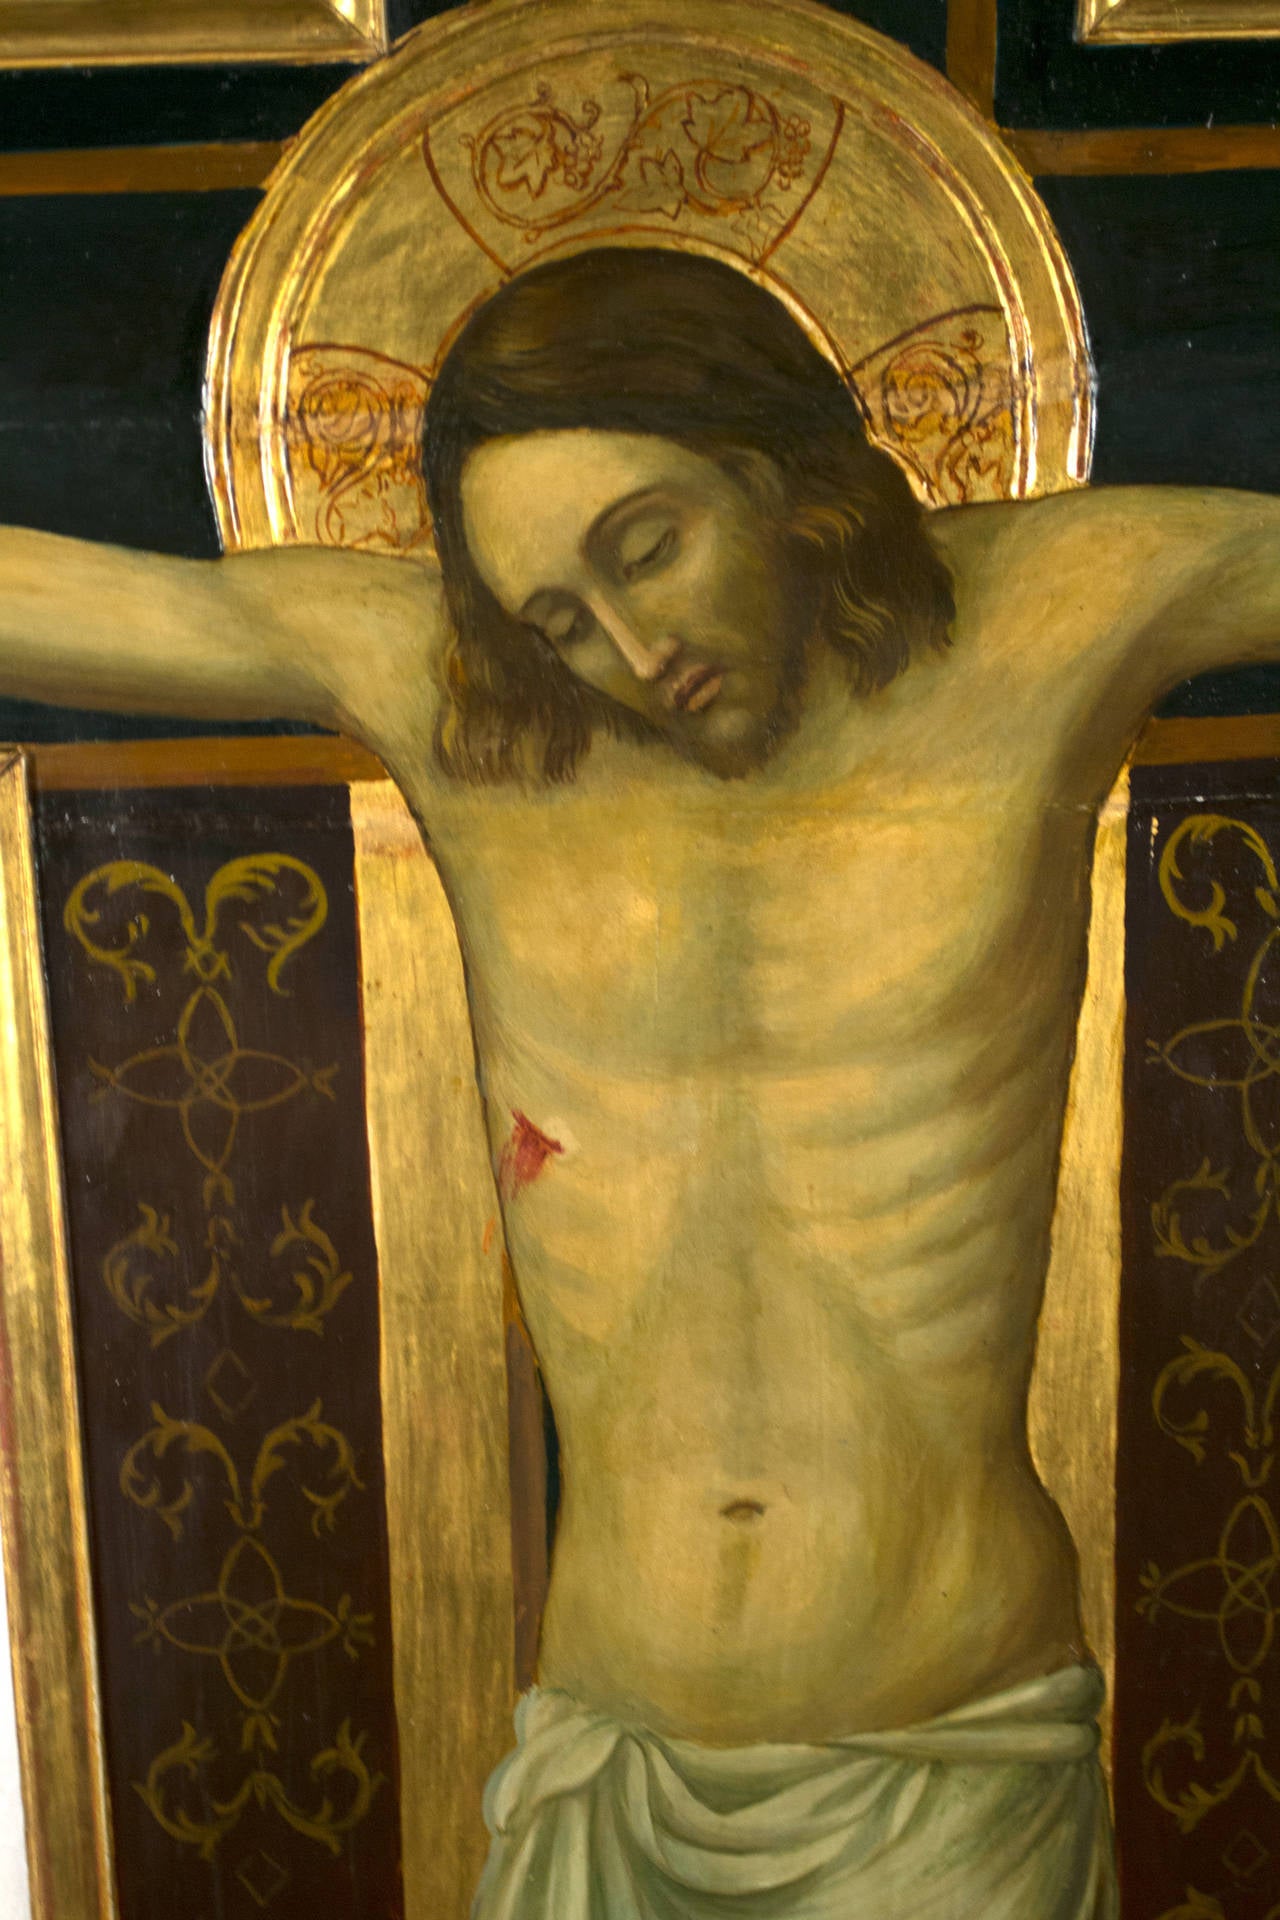 19th Century Monumental Crucifix with Painting of Christ, Mary, and John